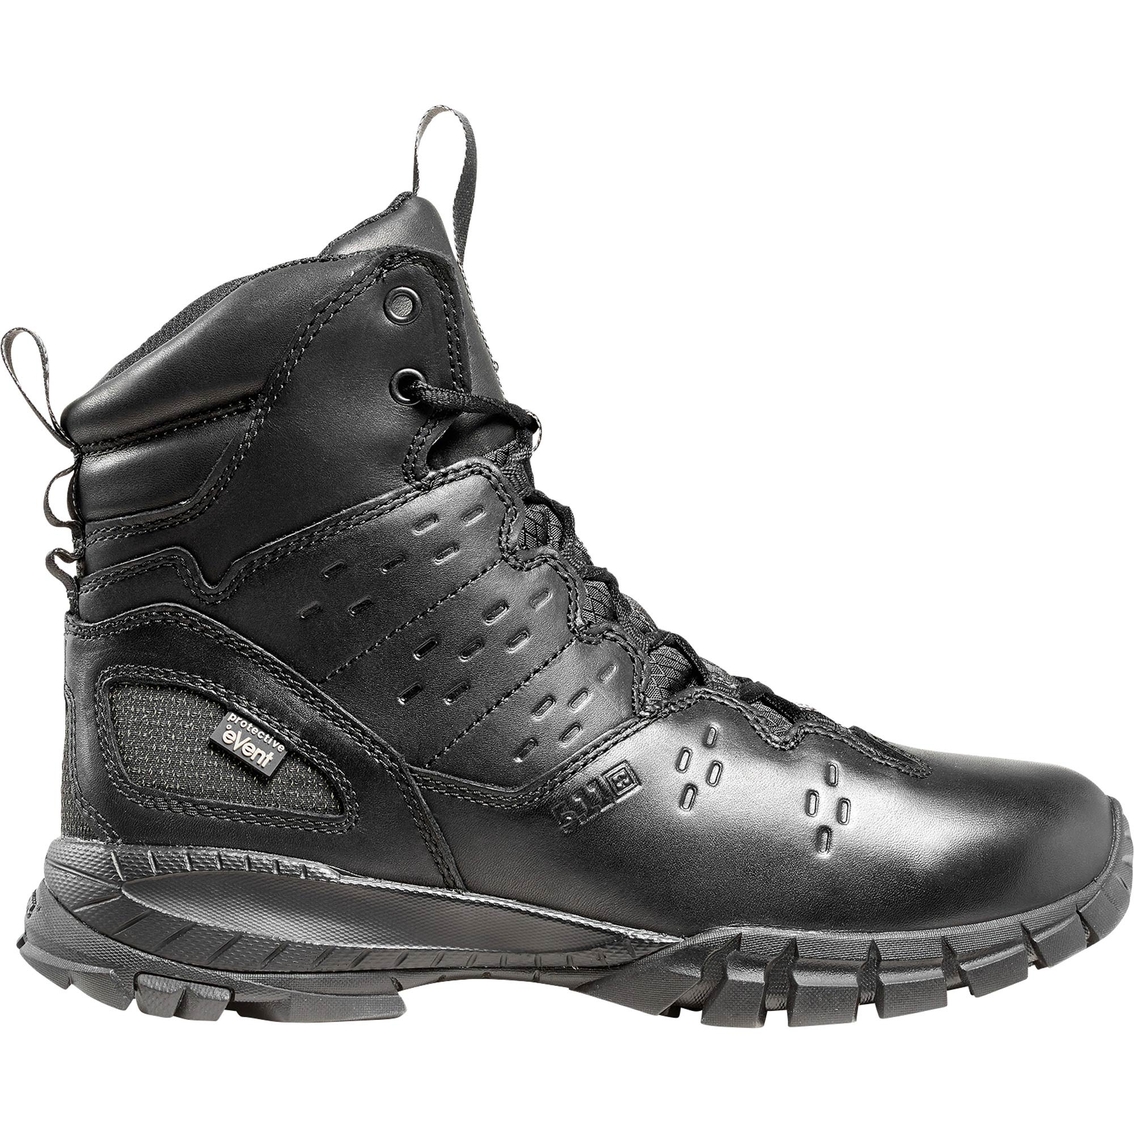 5.11 Men's Xprt 3.0 Black 6 in. Boots - Image 2 of 8